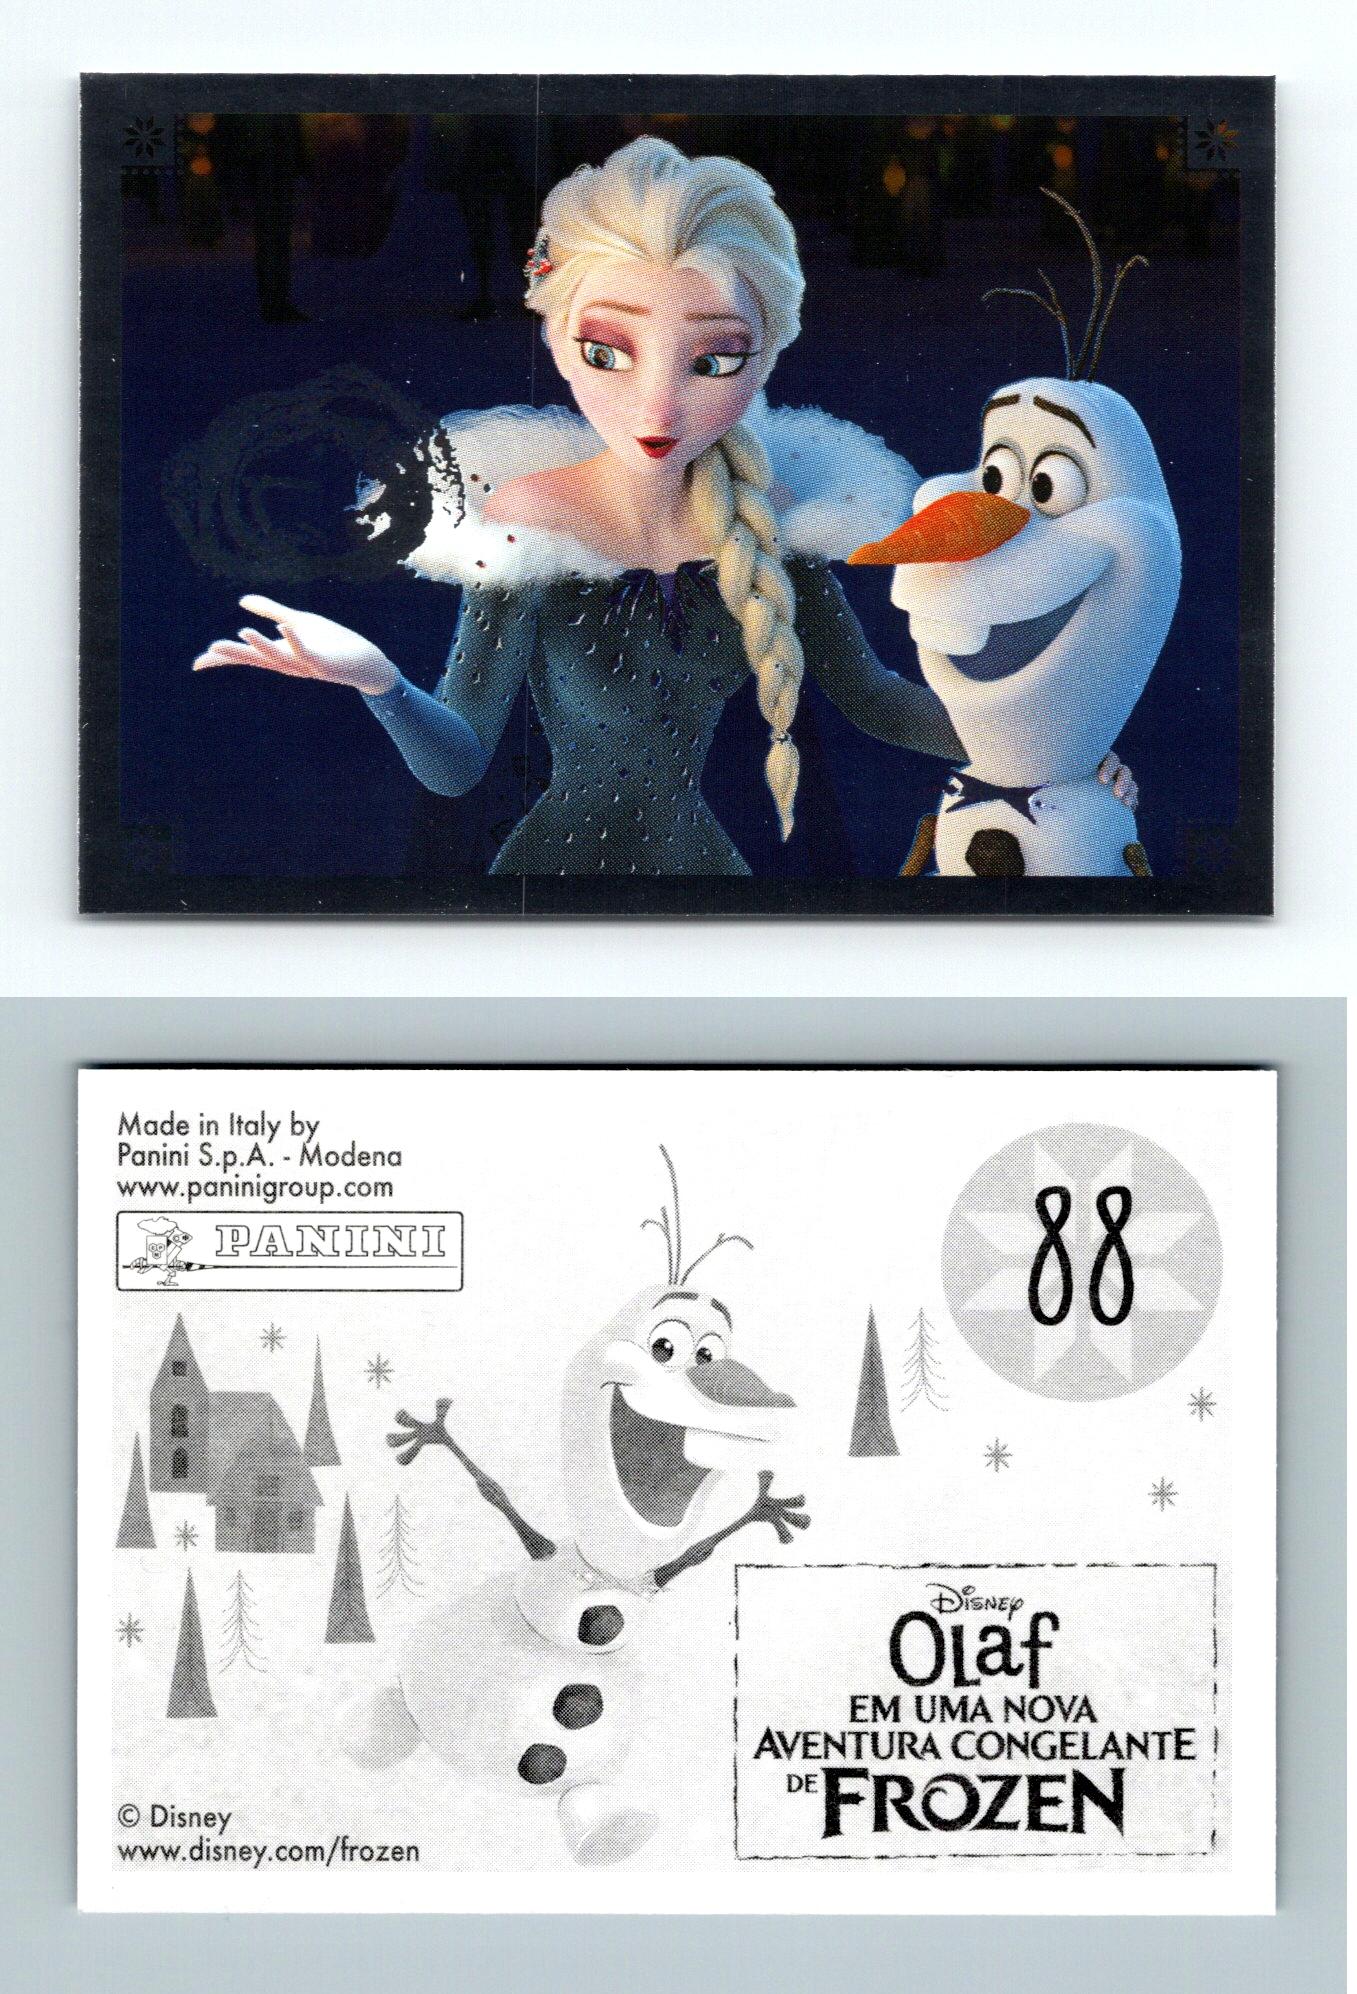 PANINI Olaf Frozen adventure stickers 6 for £1